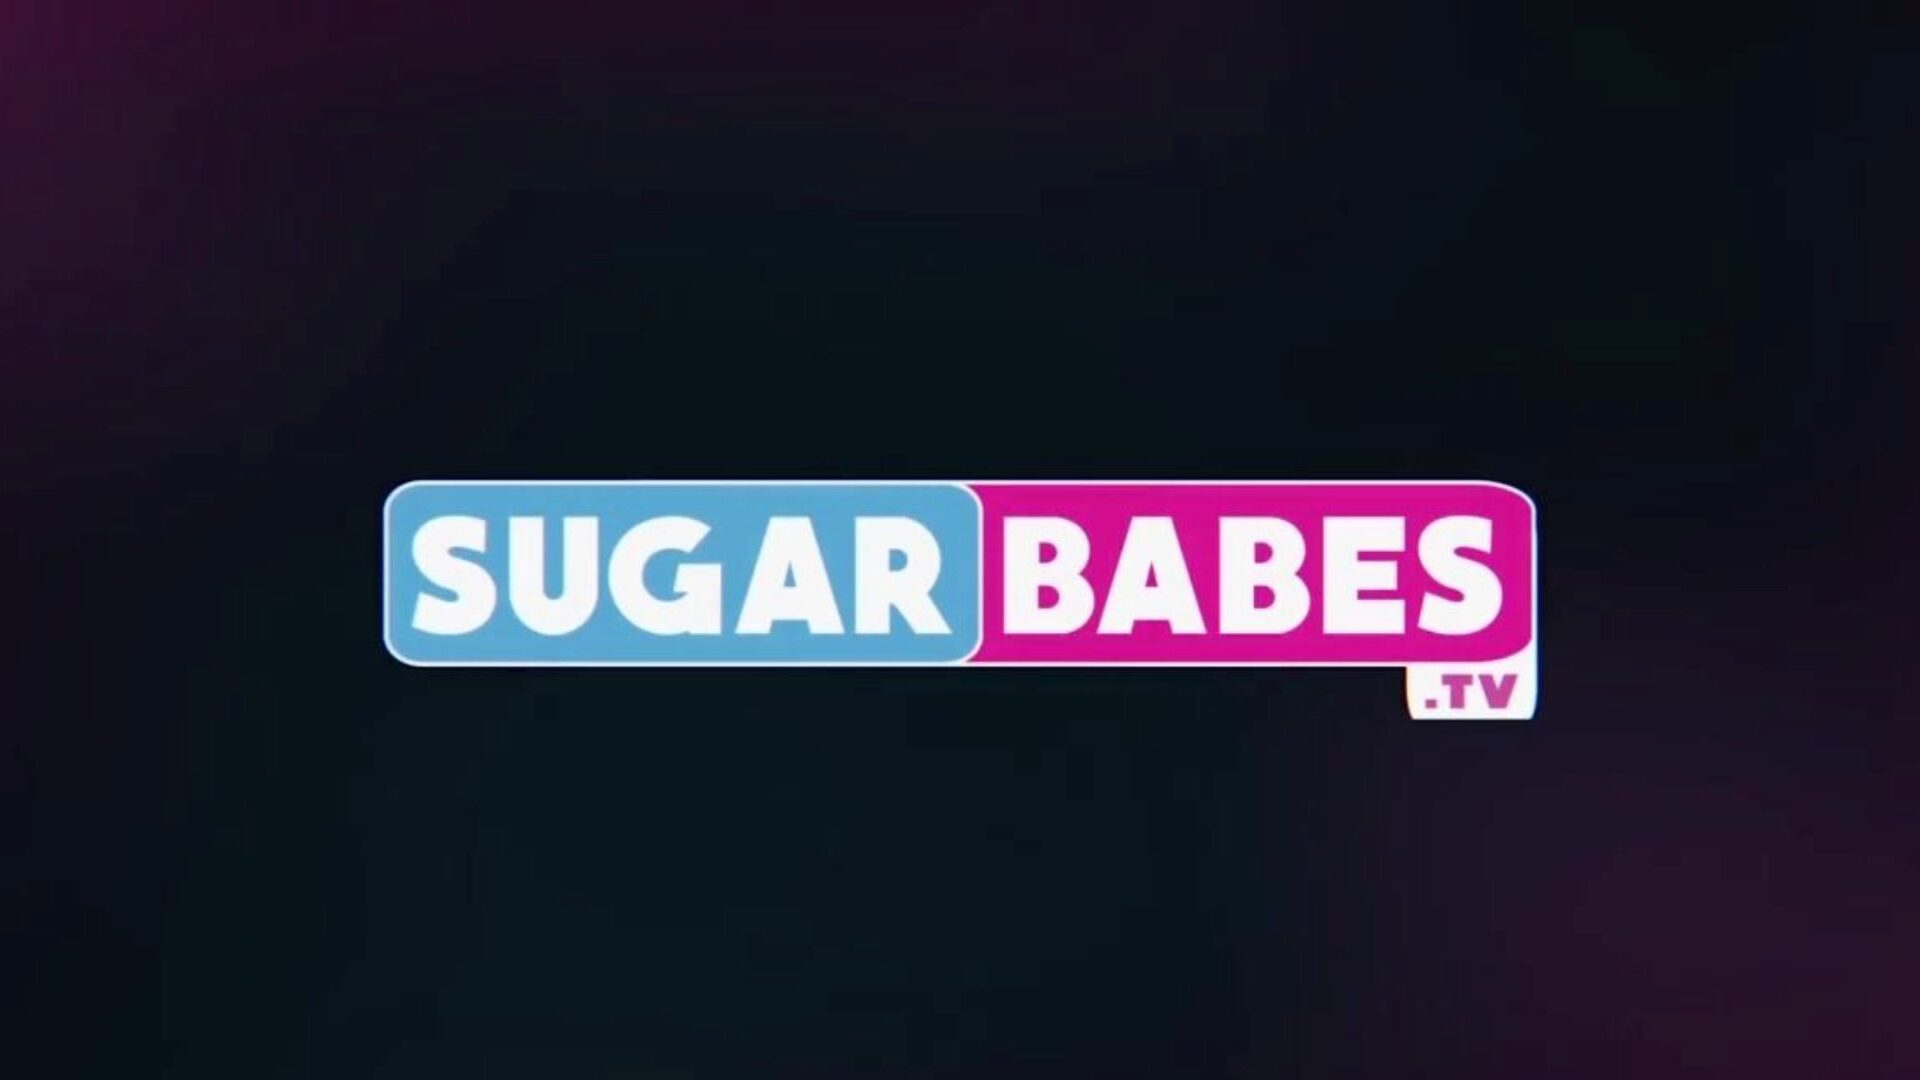 sugarbabestv the bottle, free sugar hotties tv hd porn 6b watch sugarbabestv the bottle video on xhamster, the most hd fucky-fucky tube website with lots of free-for-all sugar chicks tv lesbian sex & love porn film scenes